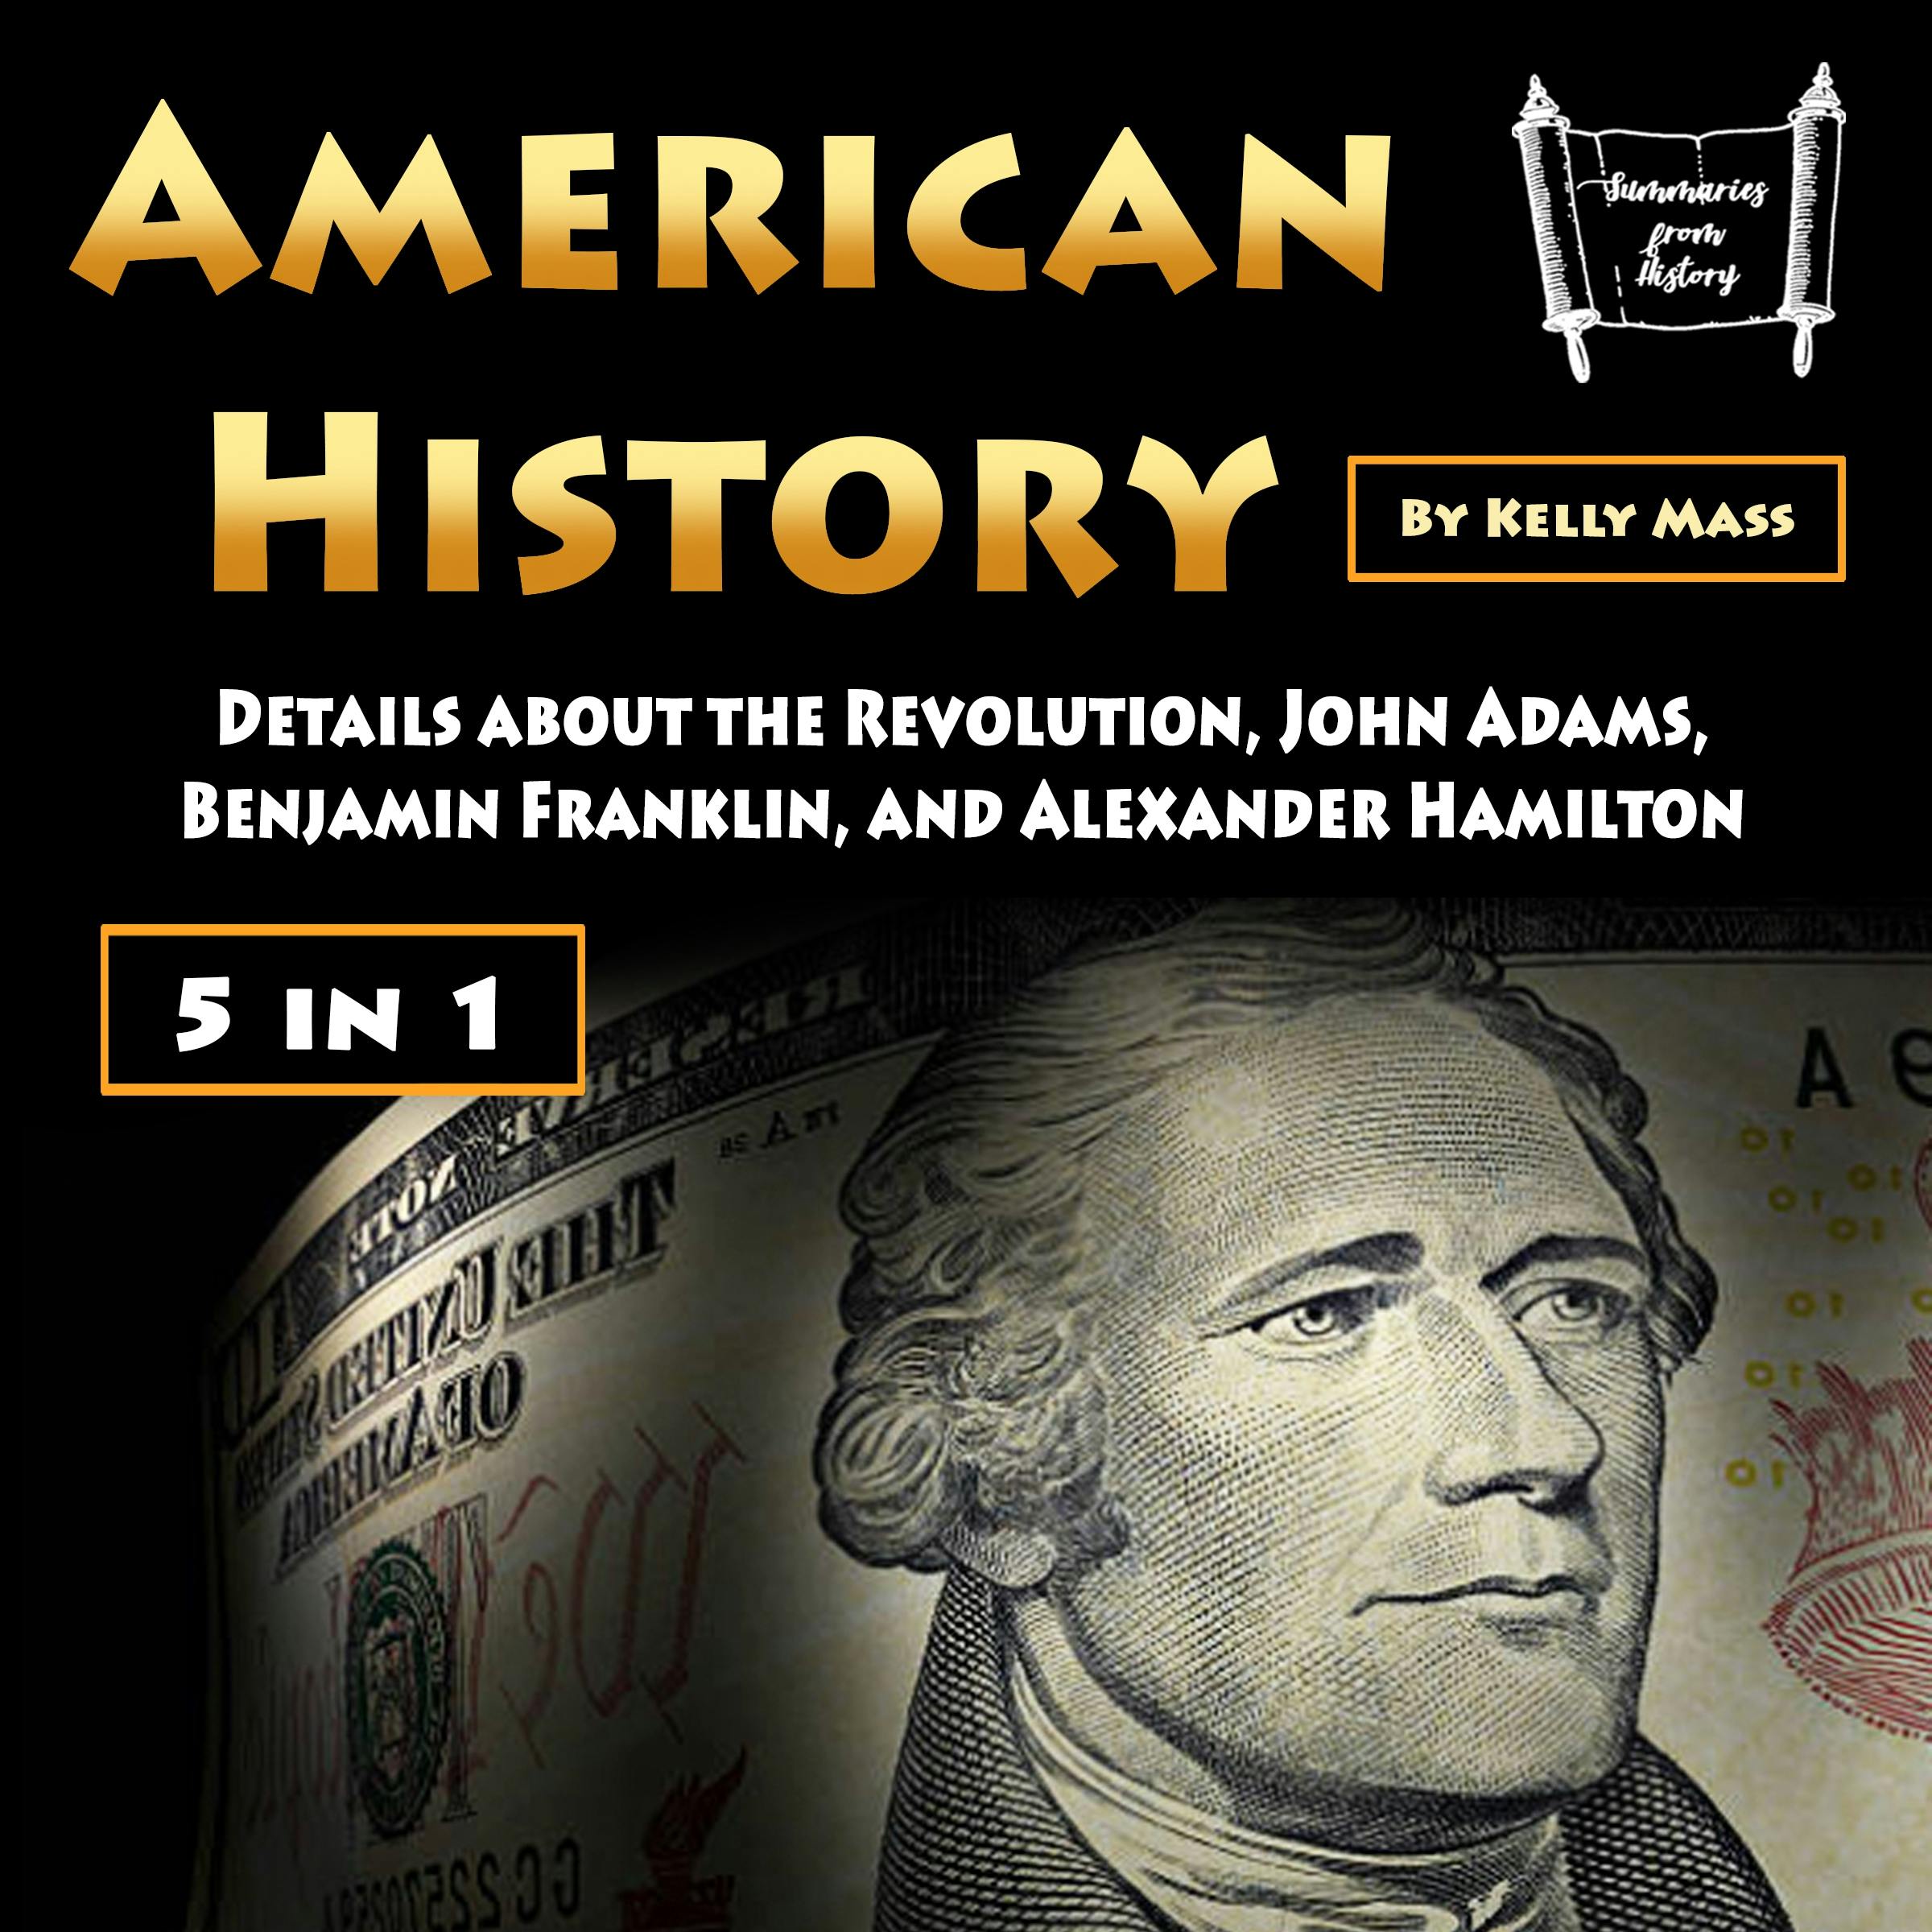 American History: Details About The Revolution, John Adams ...